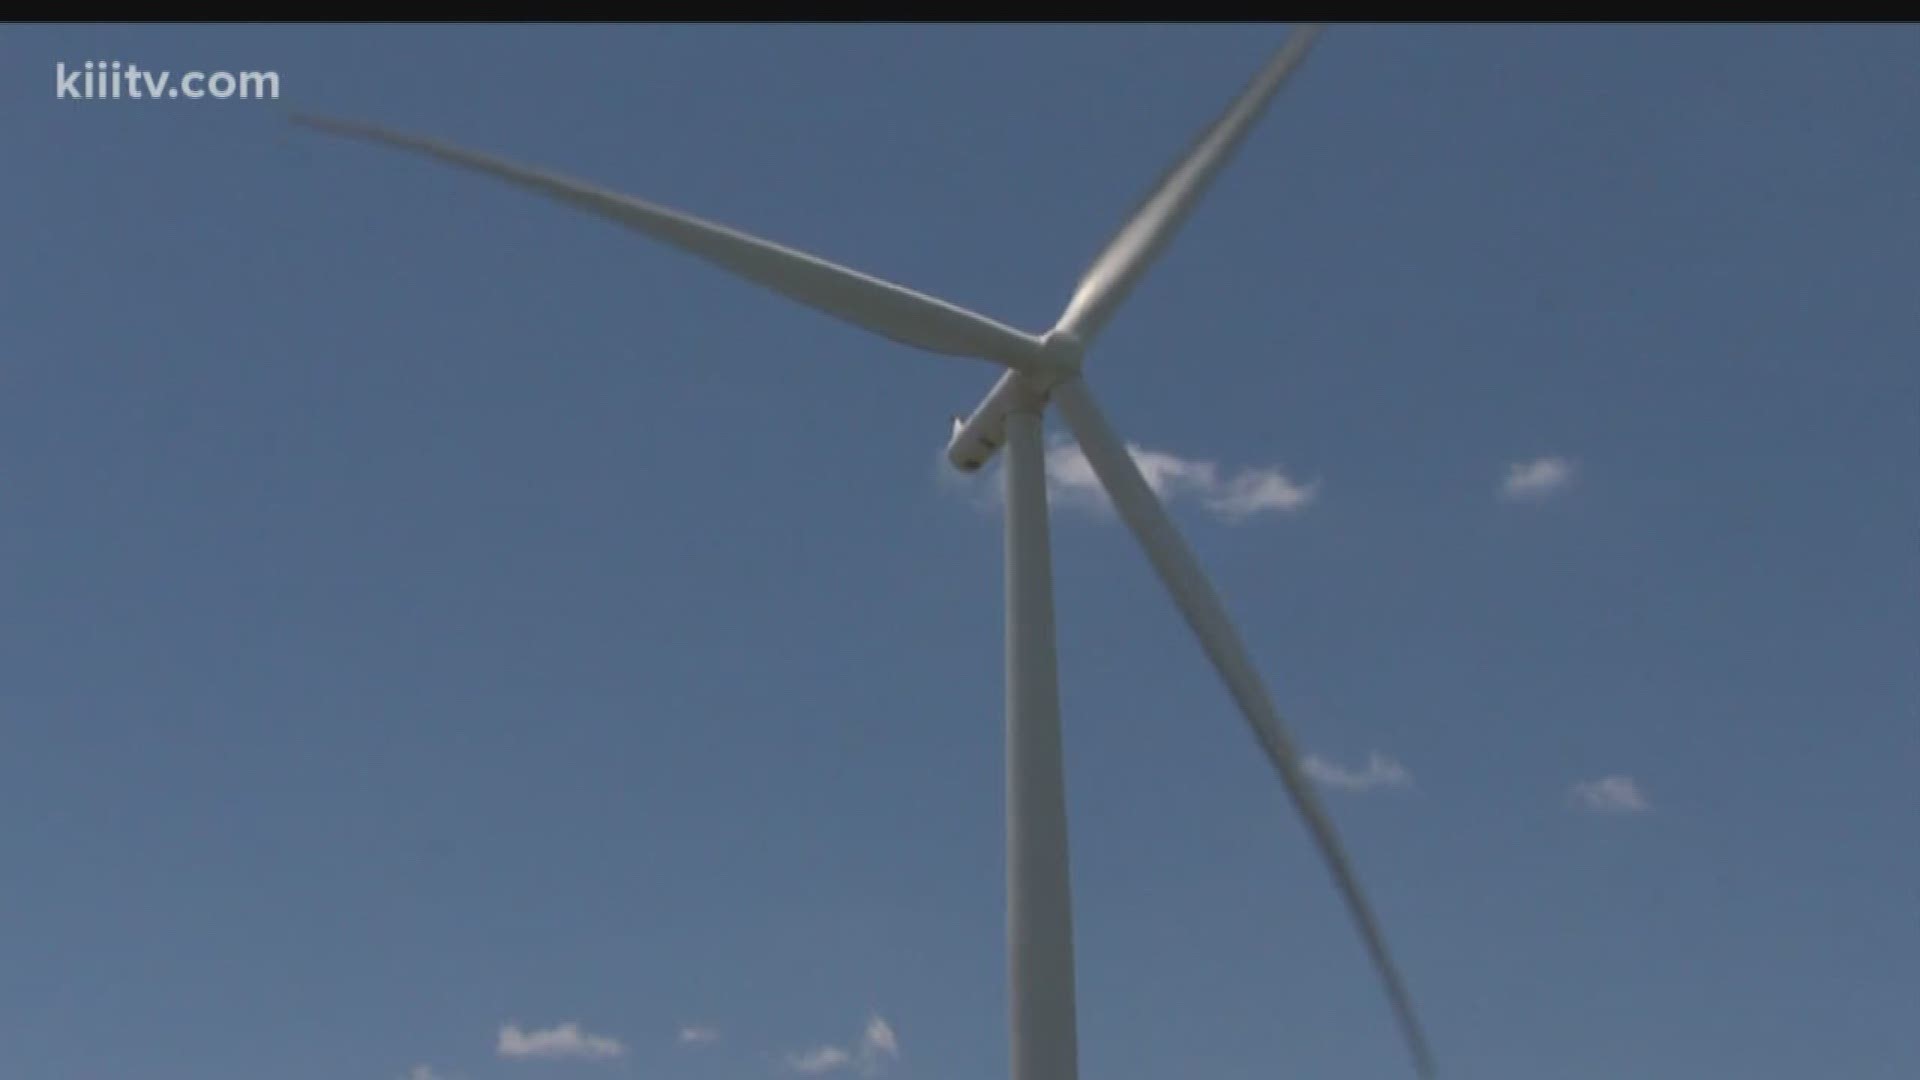 Bee County is not part of the Eagle Ford Shale energy play, but they are still getting the attention of energy producers. Several companies want to build wind farms.